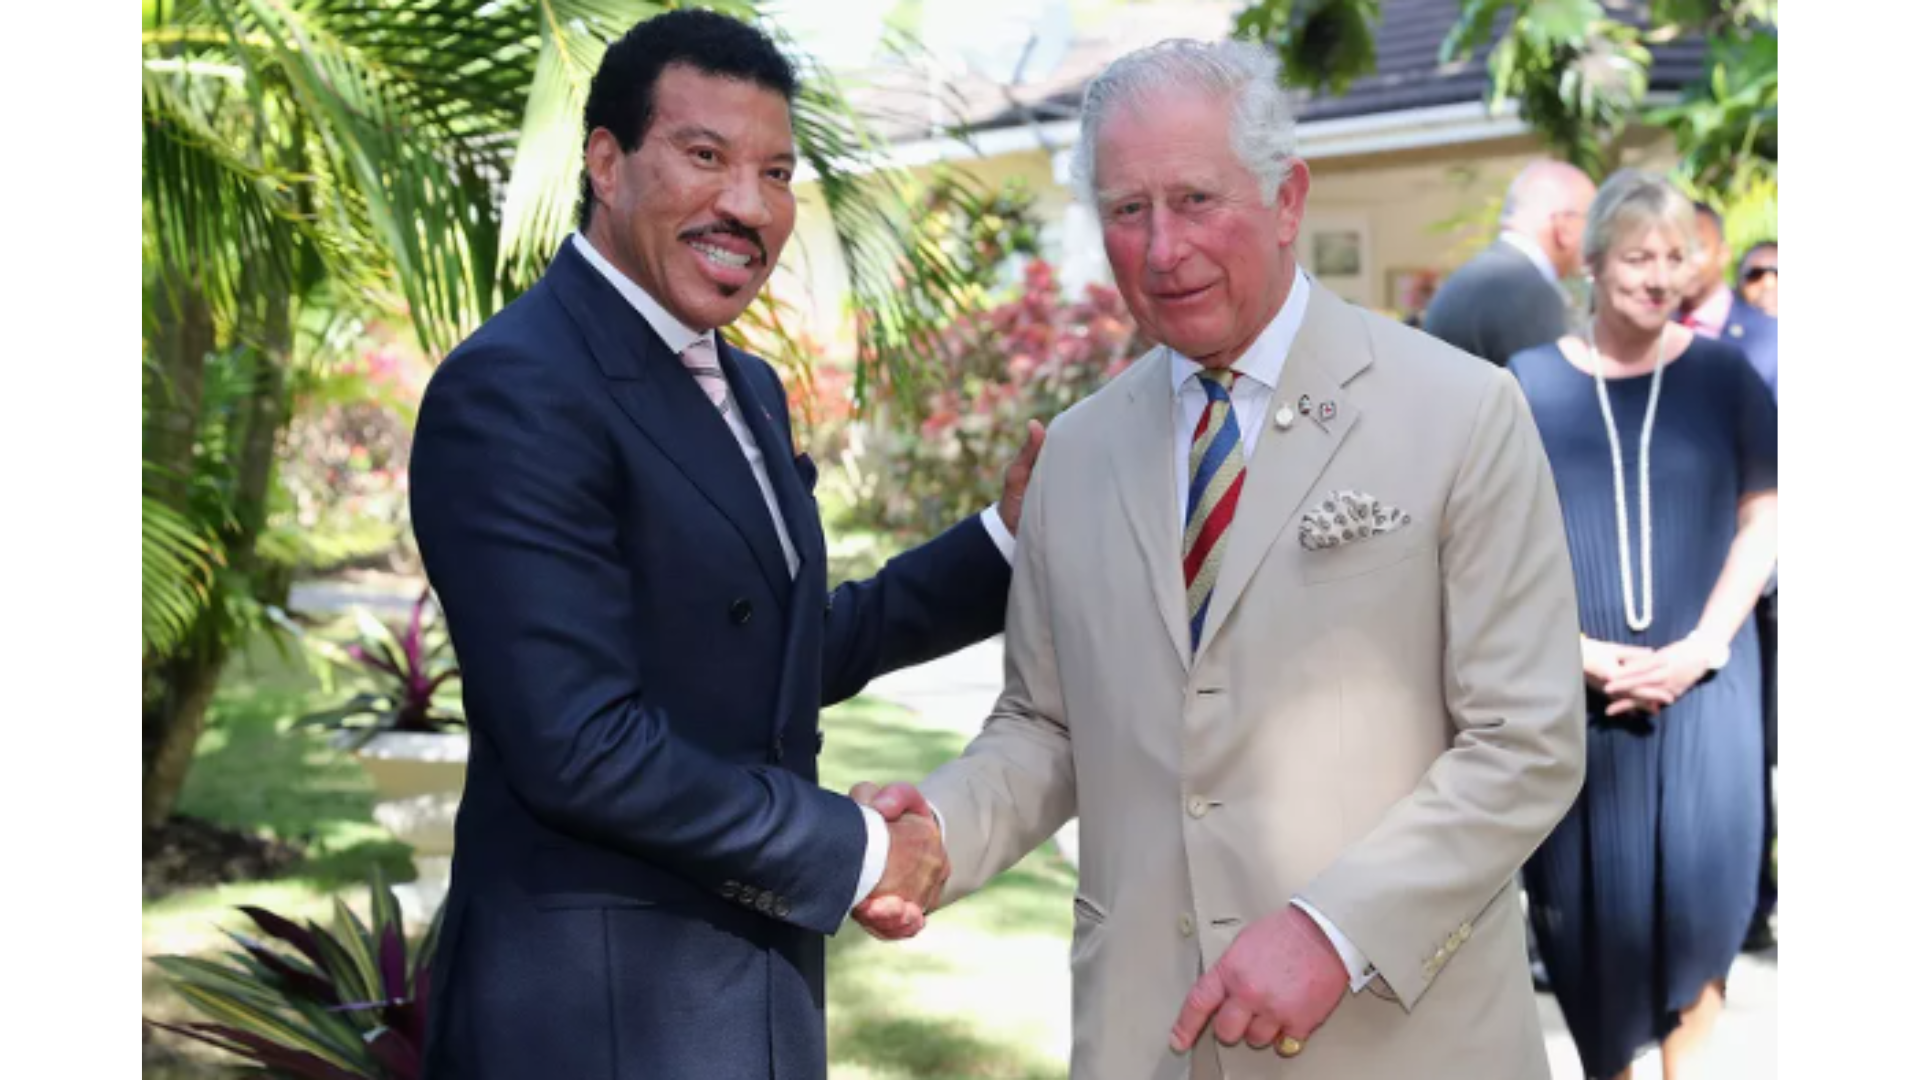 lionel richie and king charles photo chris jackson getty images